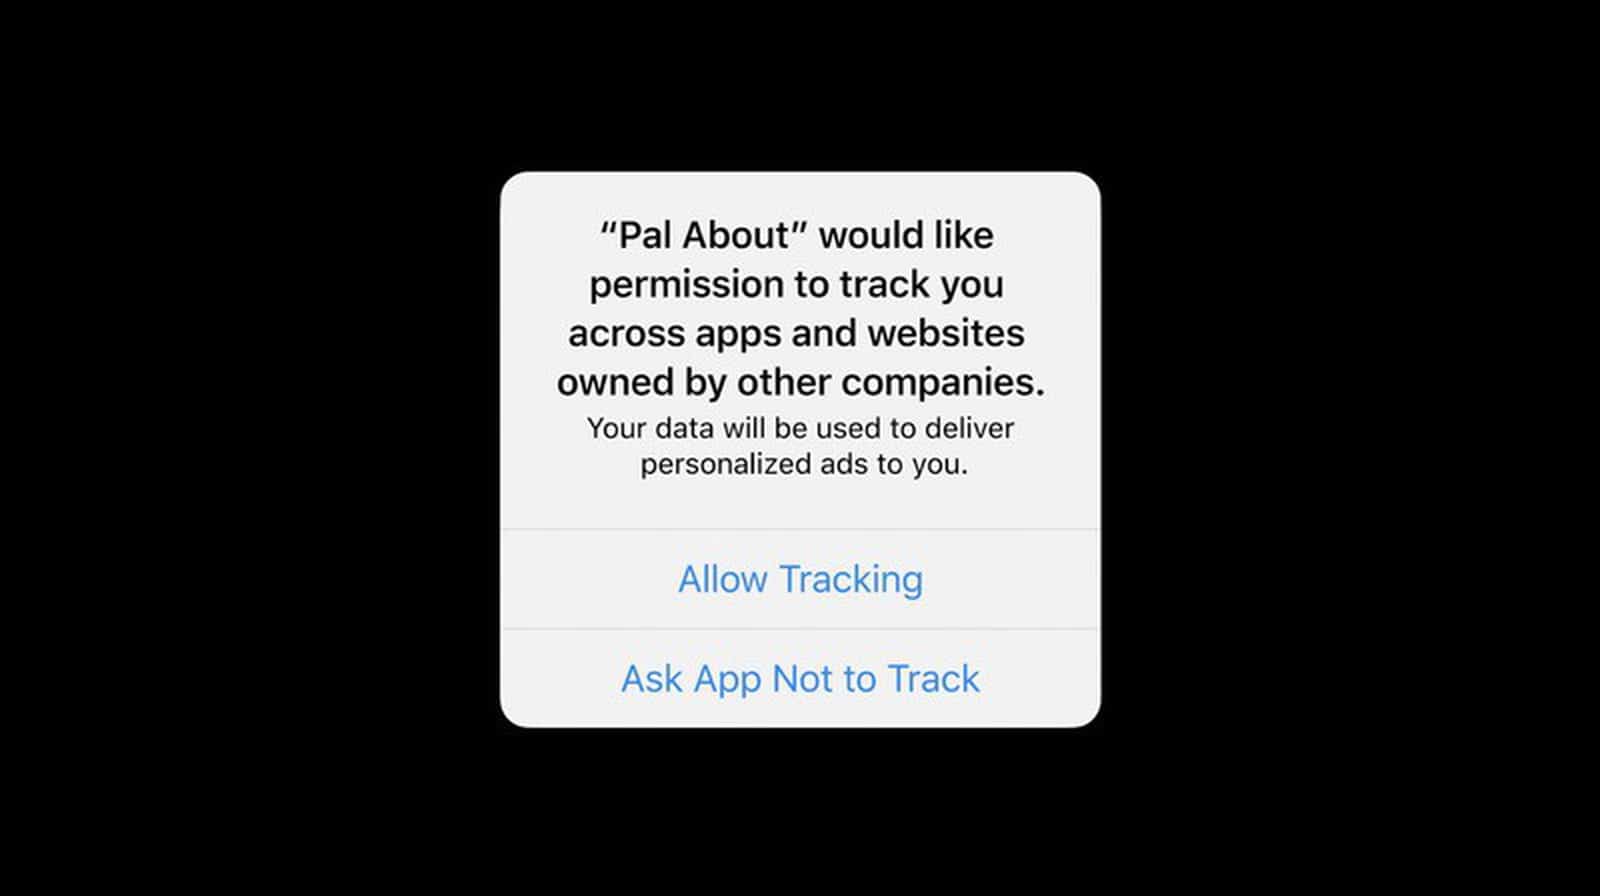 IOS 14 pop-up where the user can grant or deny access to trackers in applications